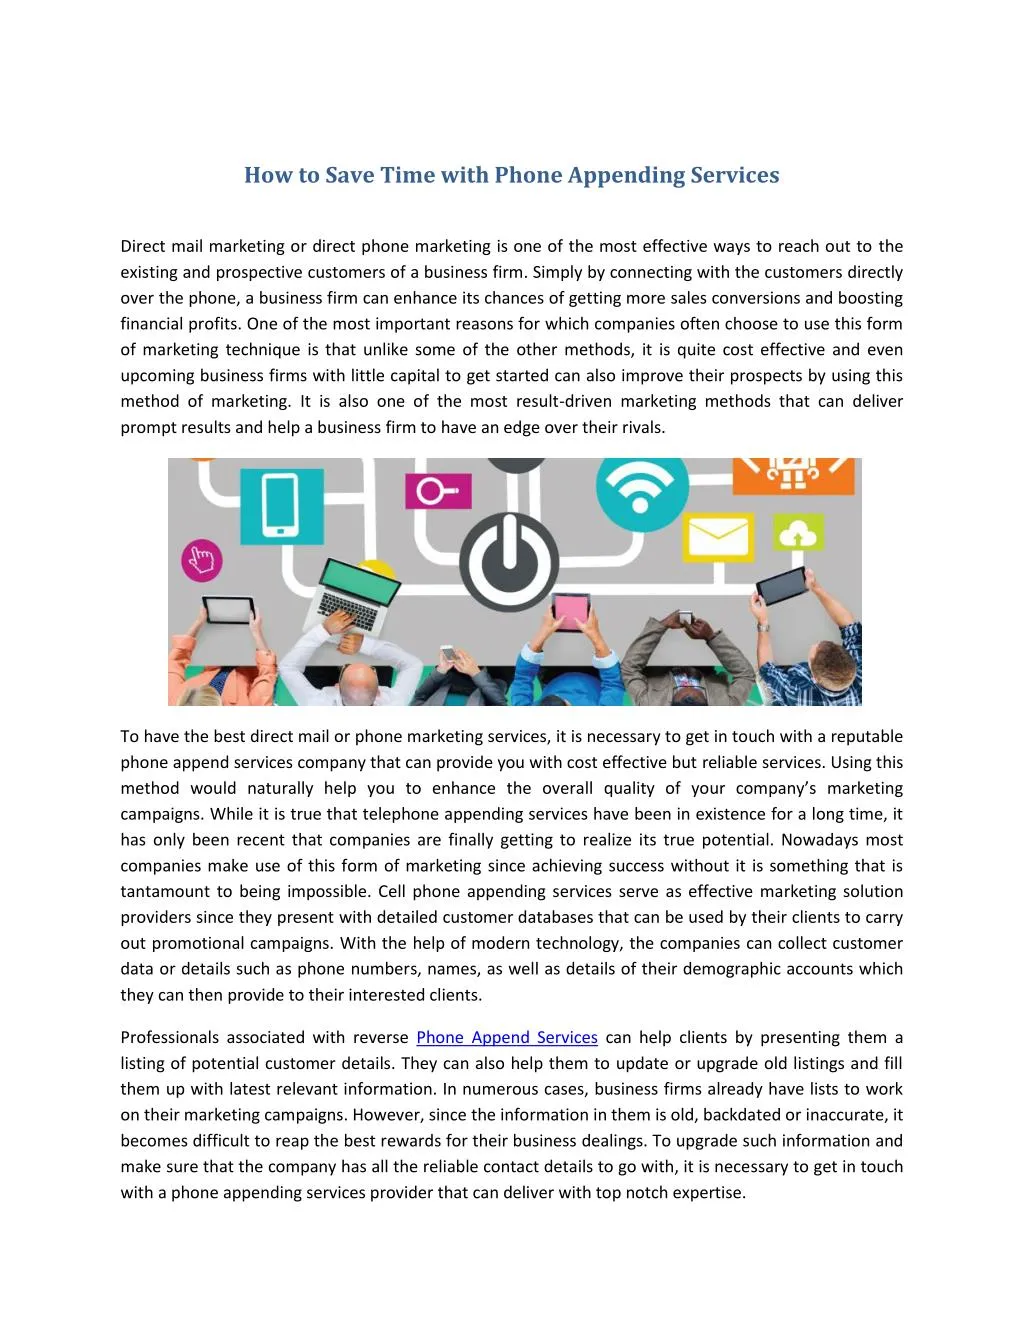 how to save time with phone appending services